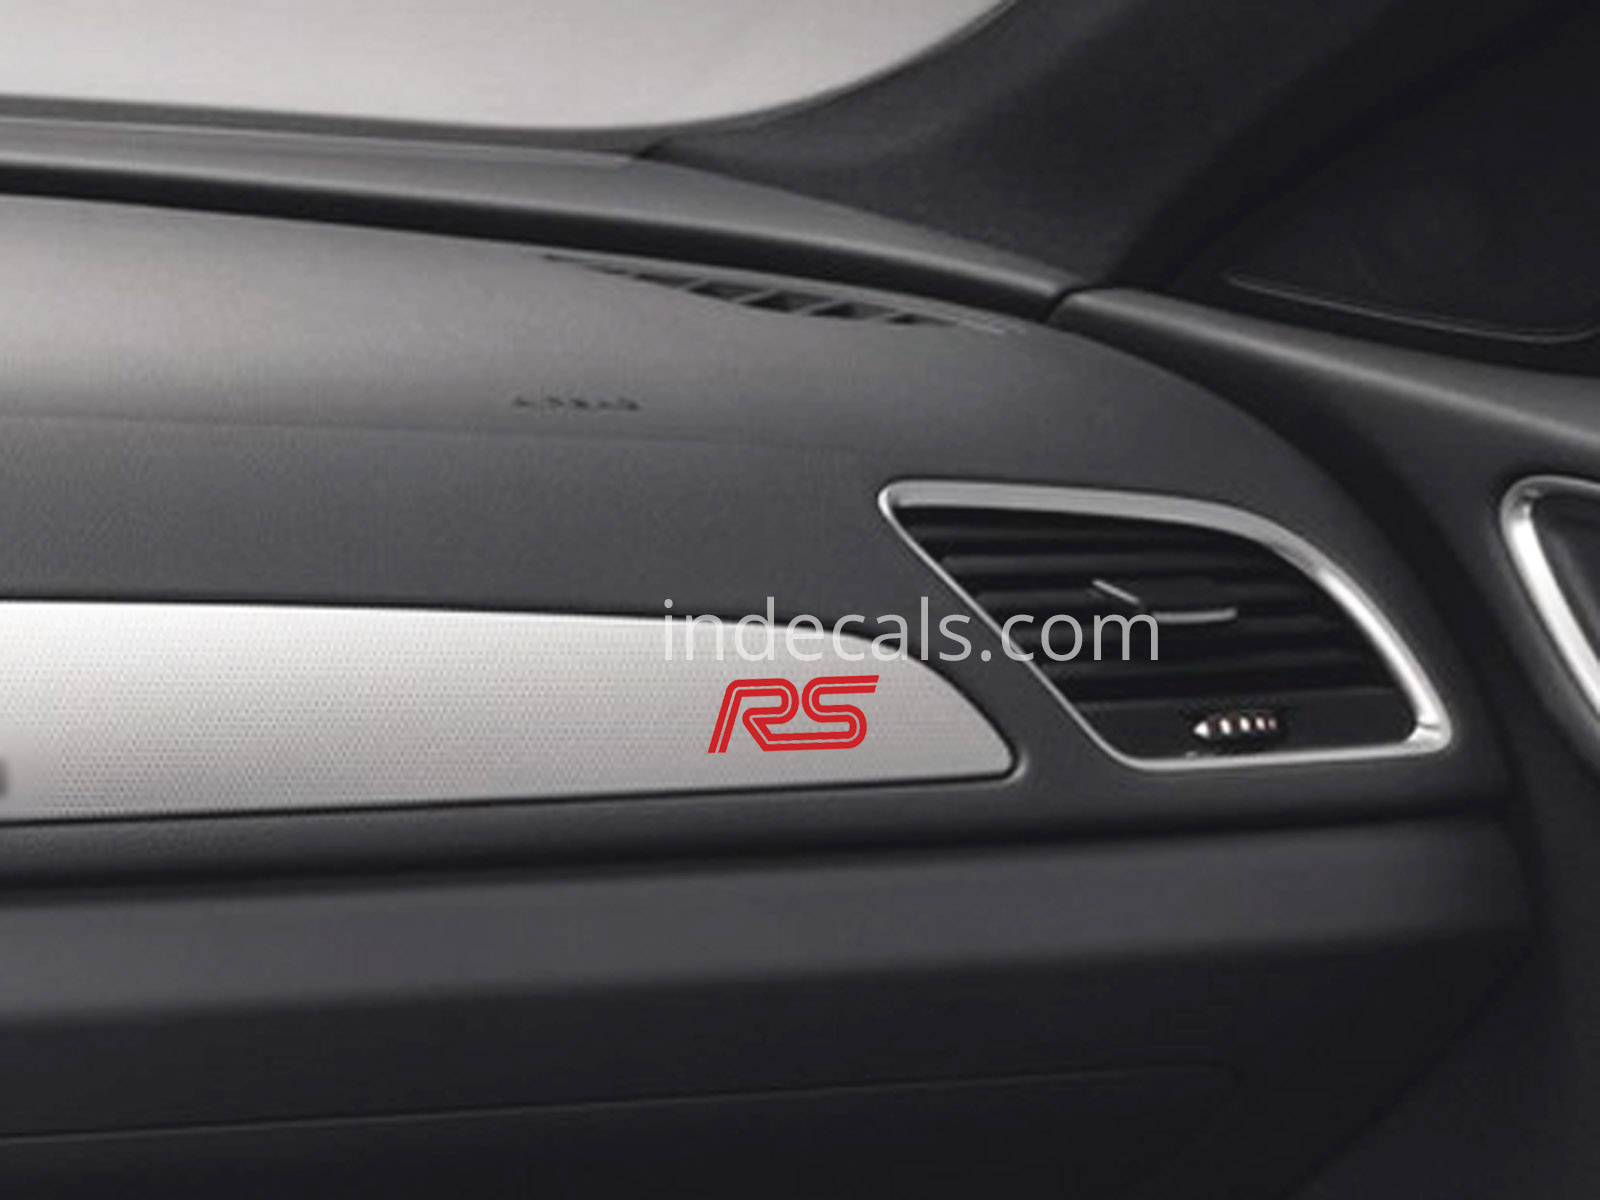 3 x Ford RS Stickers for Dash Trim - Red